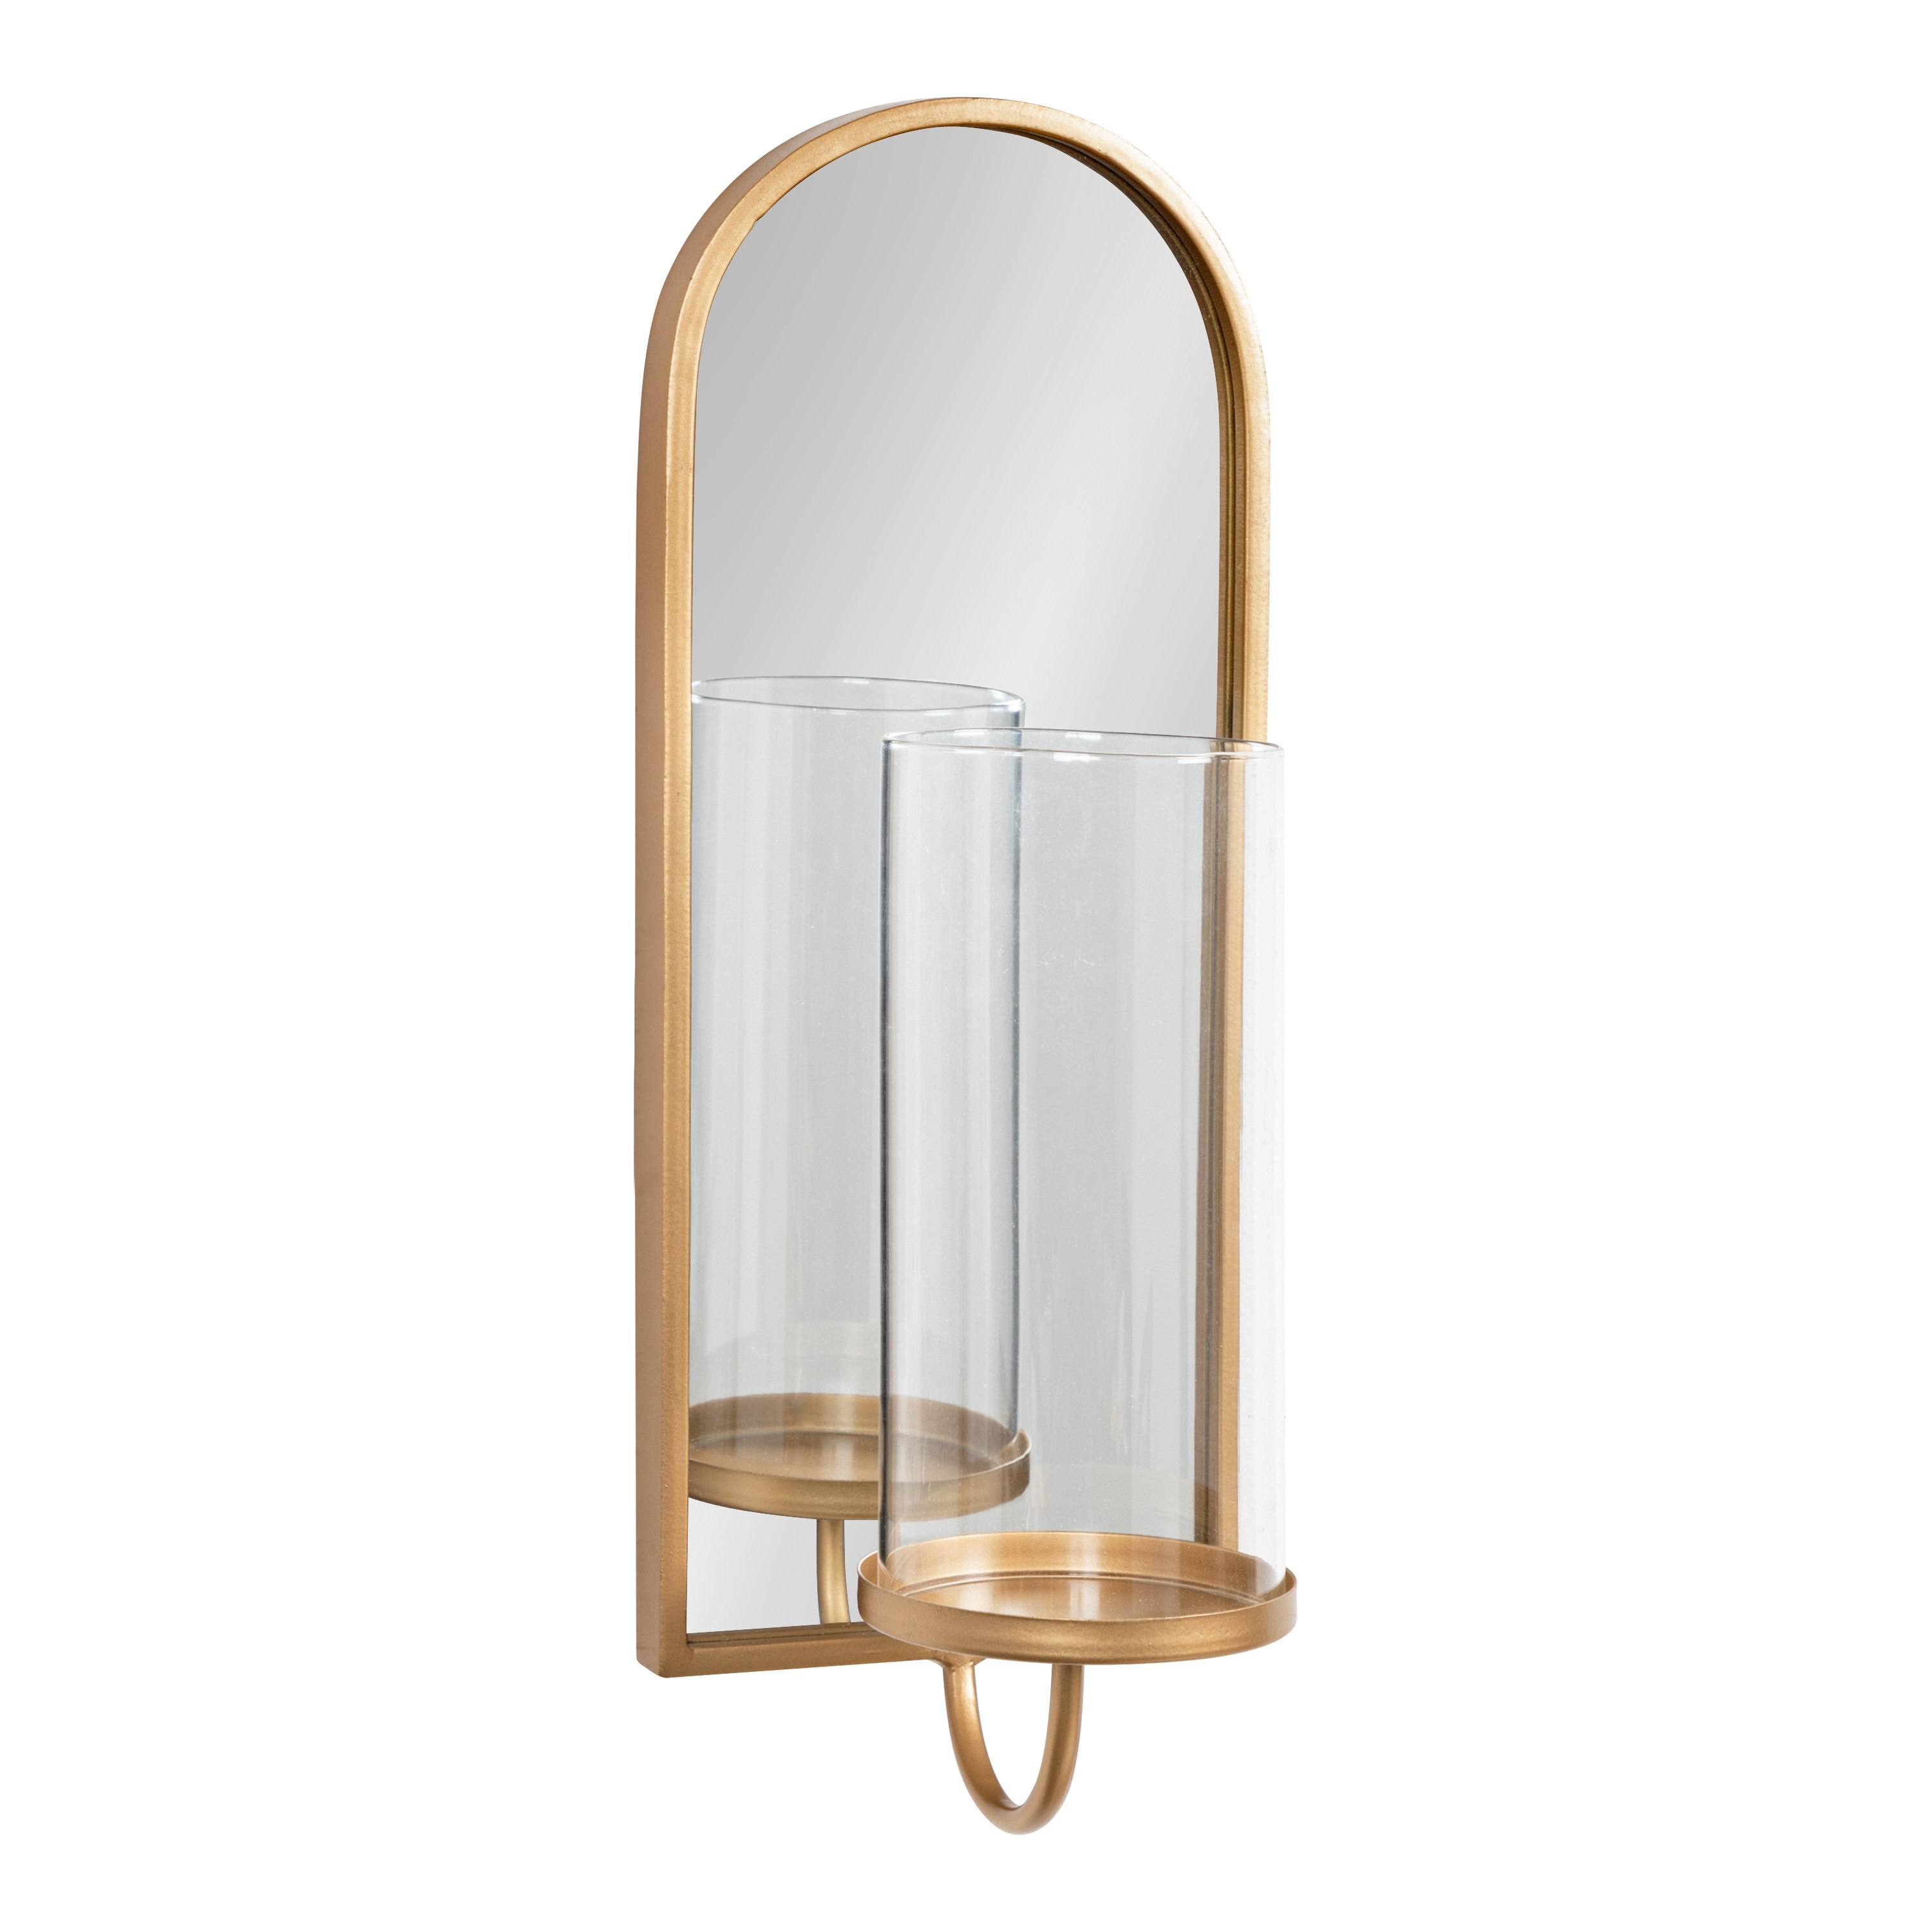 Kate and Laurel Ezerin Metal Mirror Wall Sconce 6x5x16 Bed Bath   Beyond 32281012